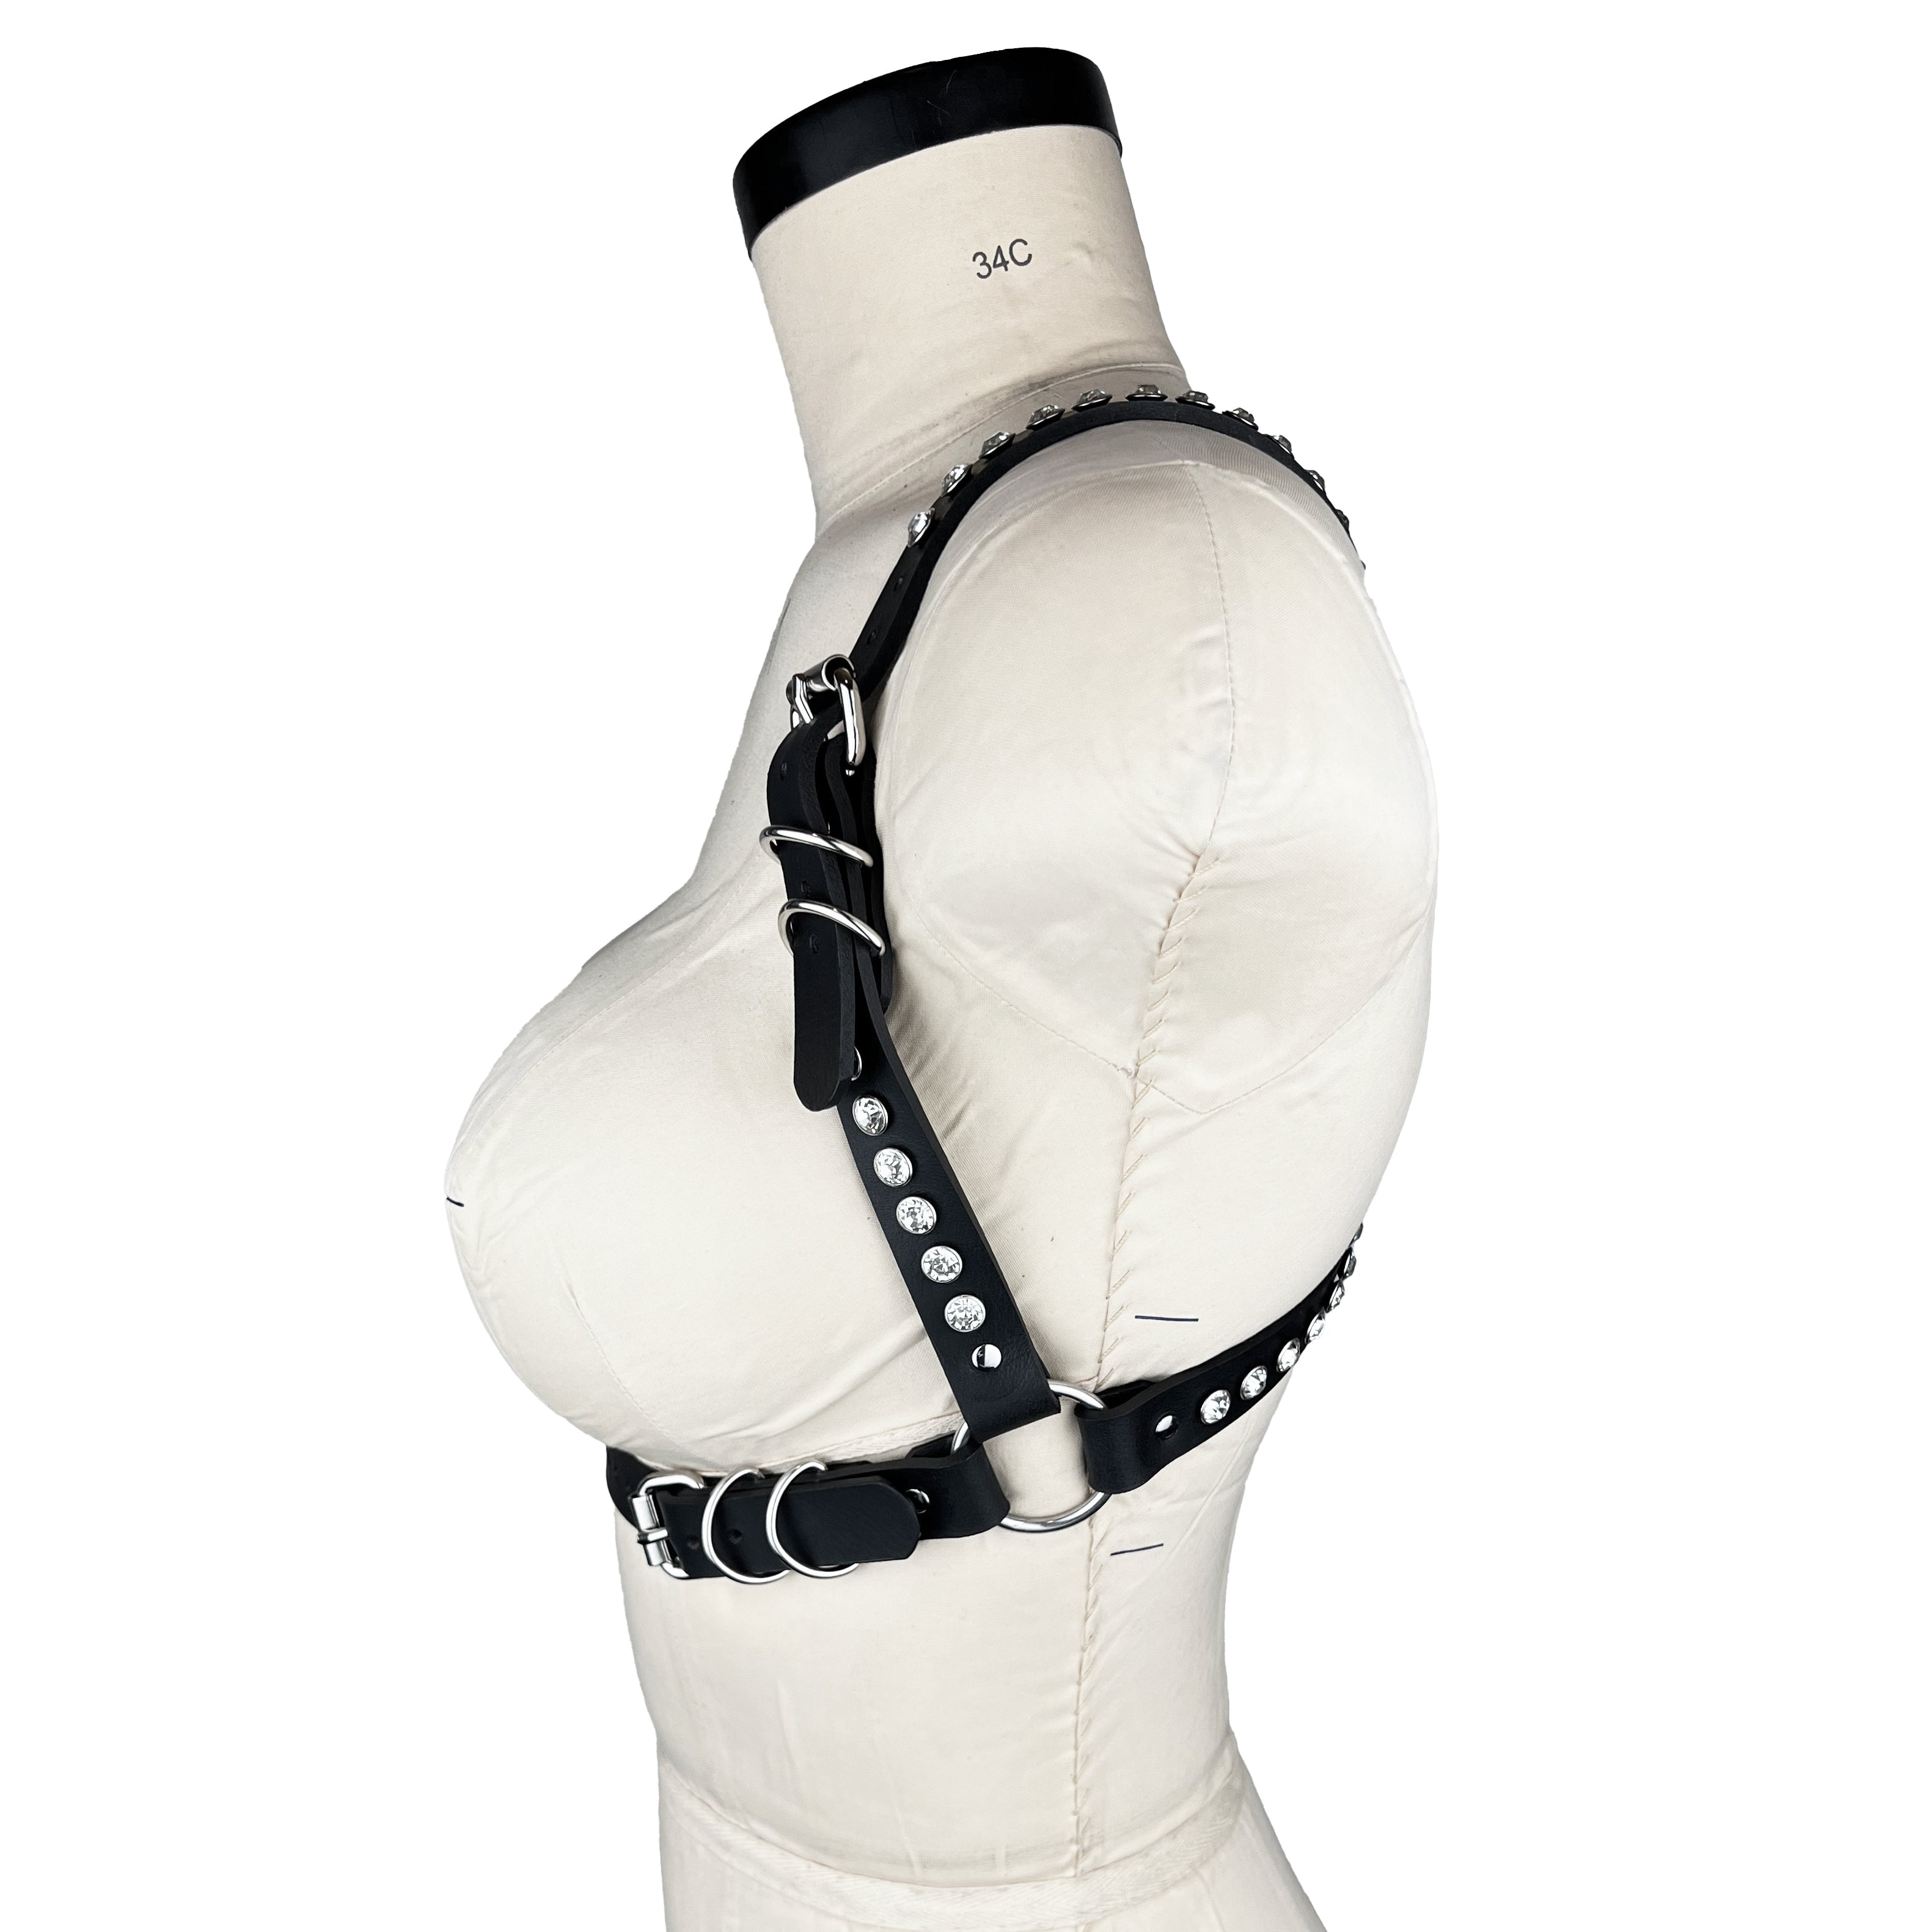 luxury Italian leather and crystal fashion and fetish women's men's gemma harness, bespoke, made-to-order in nyc, side view